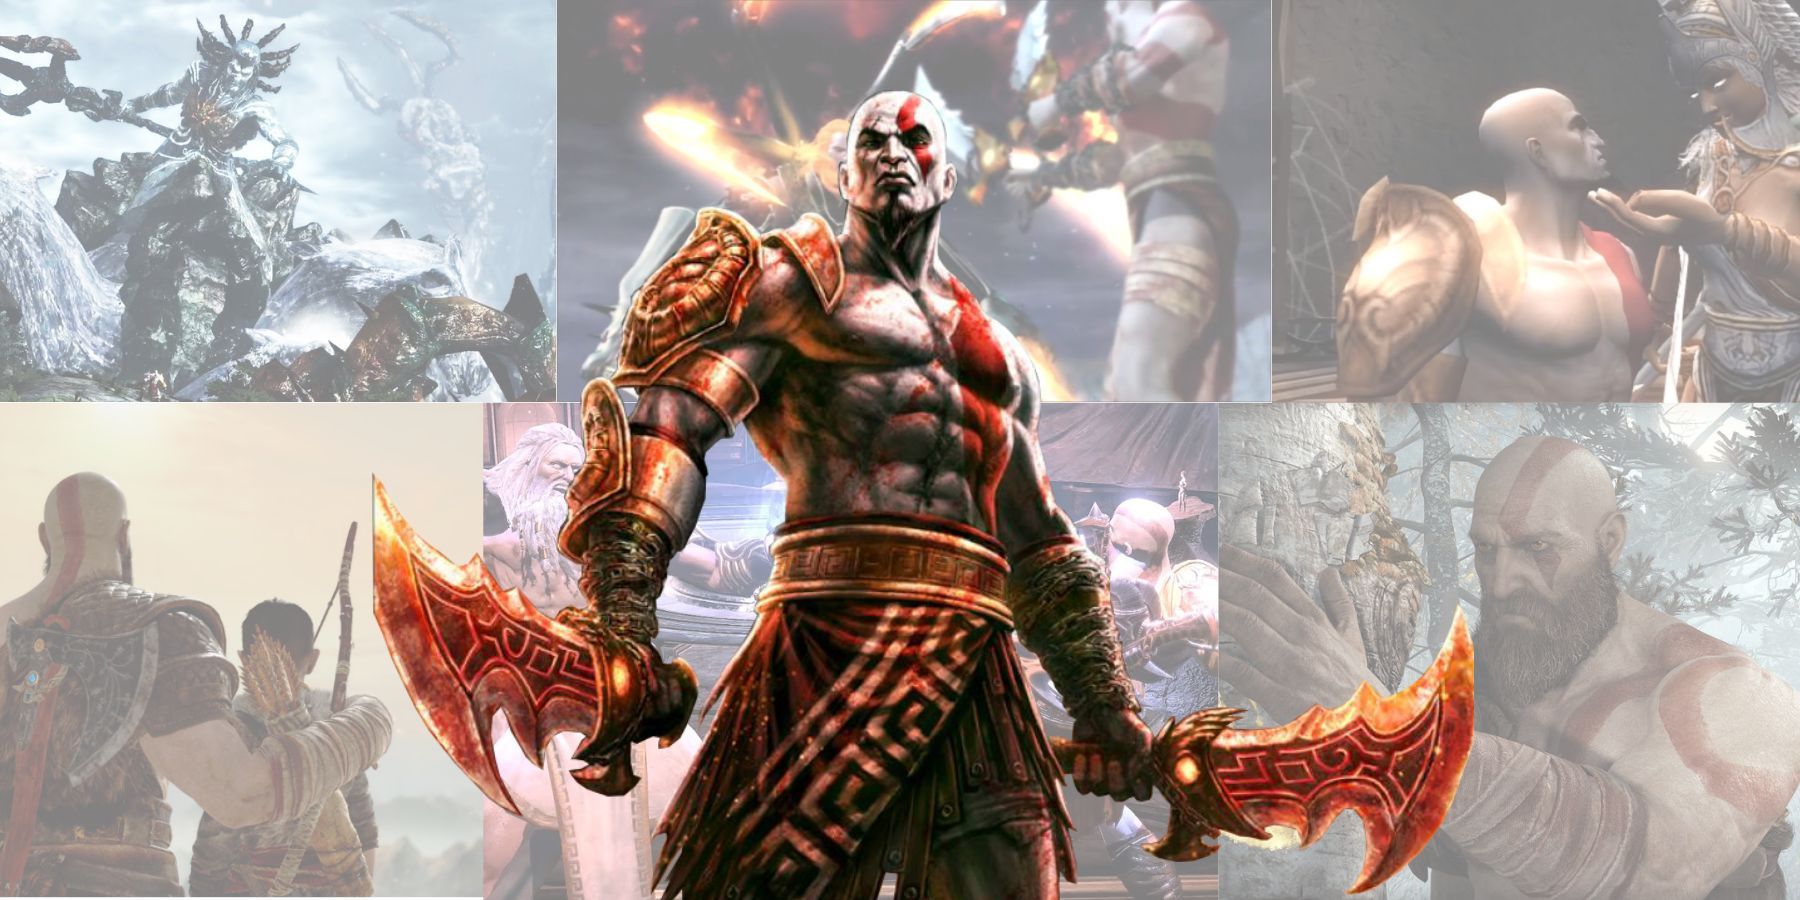 Finished God of War 2 and 3 back to back, which is your favorite